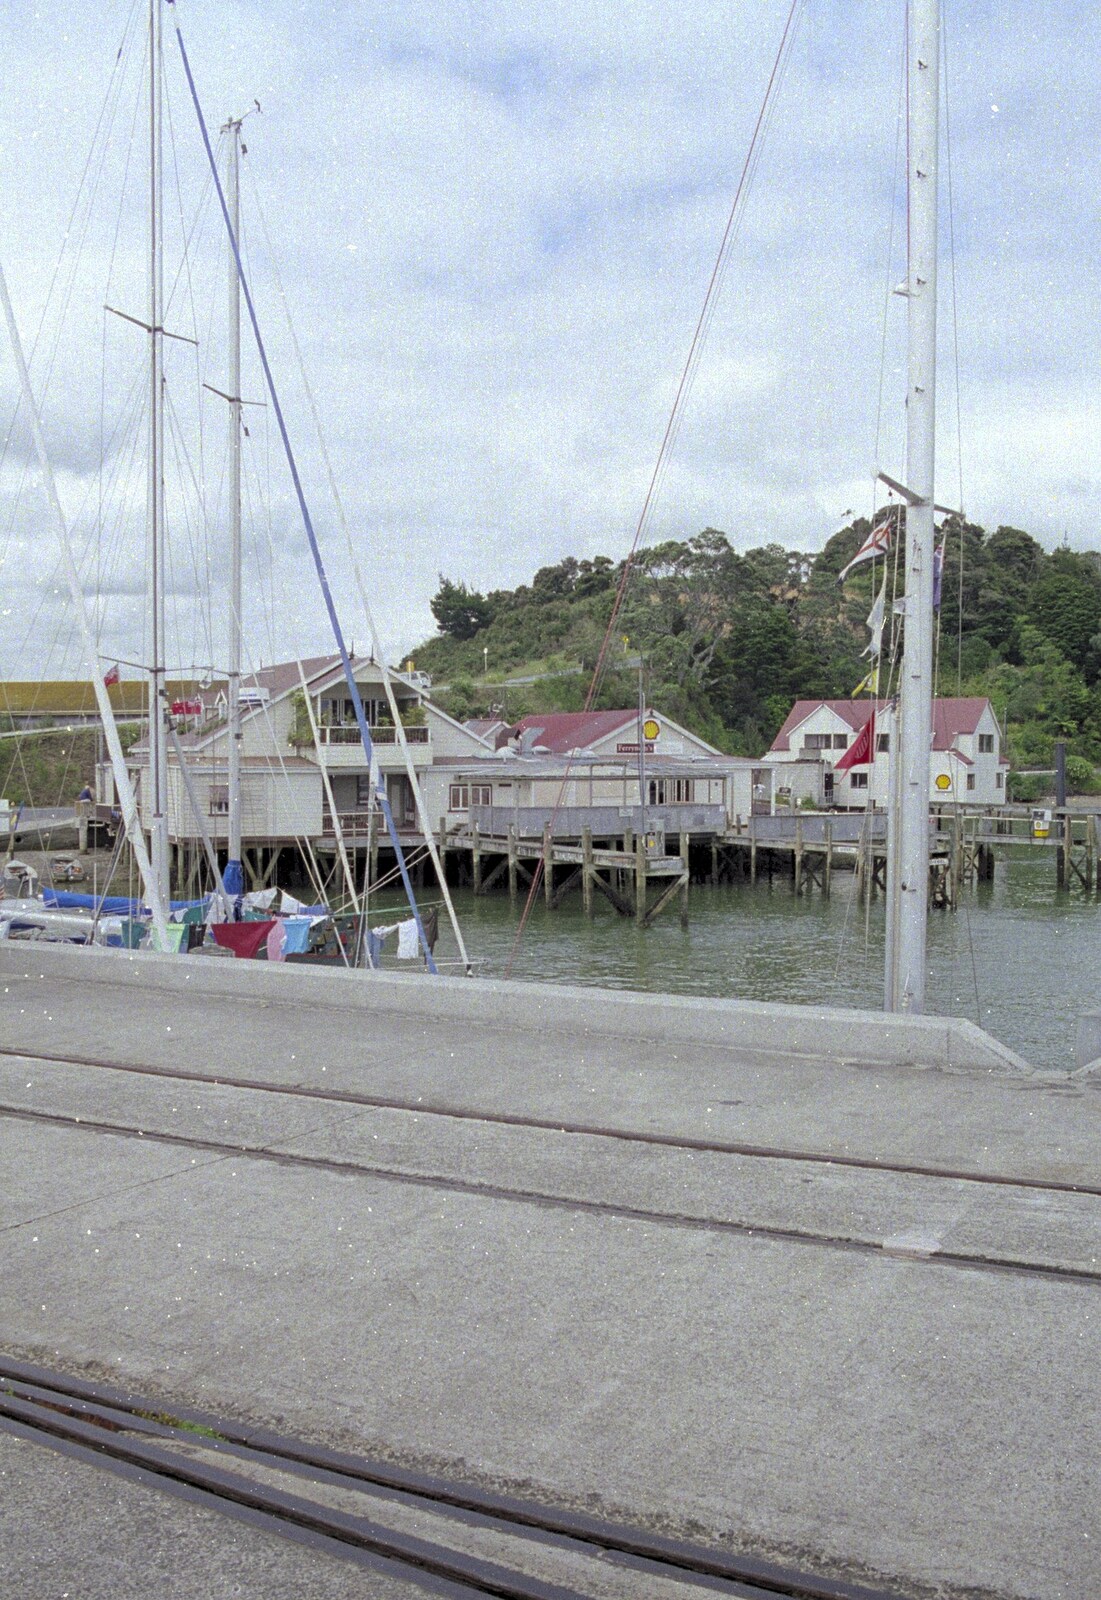 Tracks in a quayside somewhere from The Bay Of Islands, New Zealand - 29th November 1992